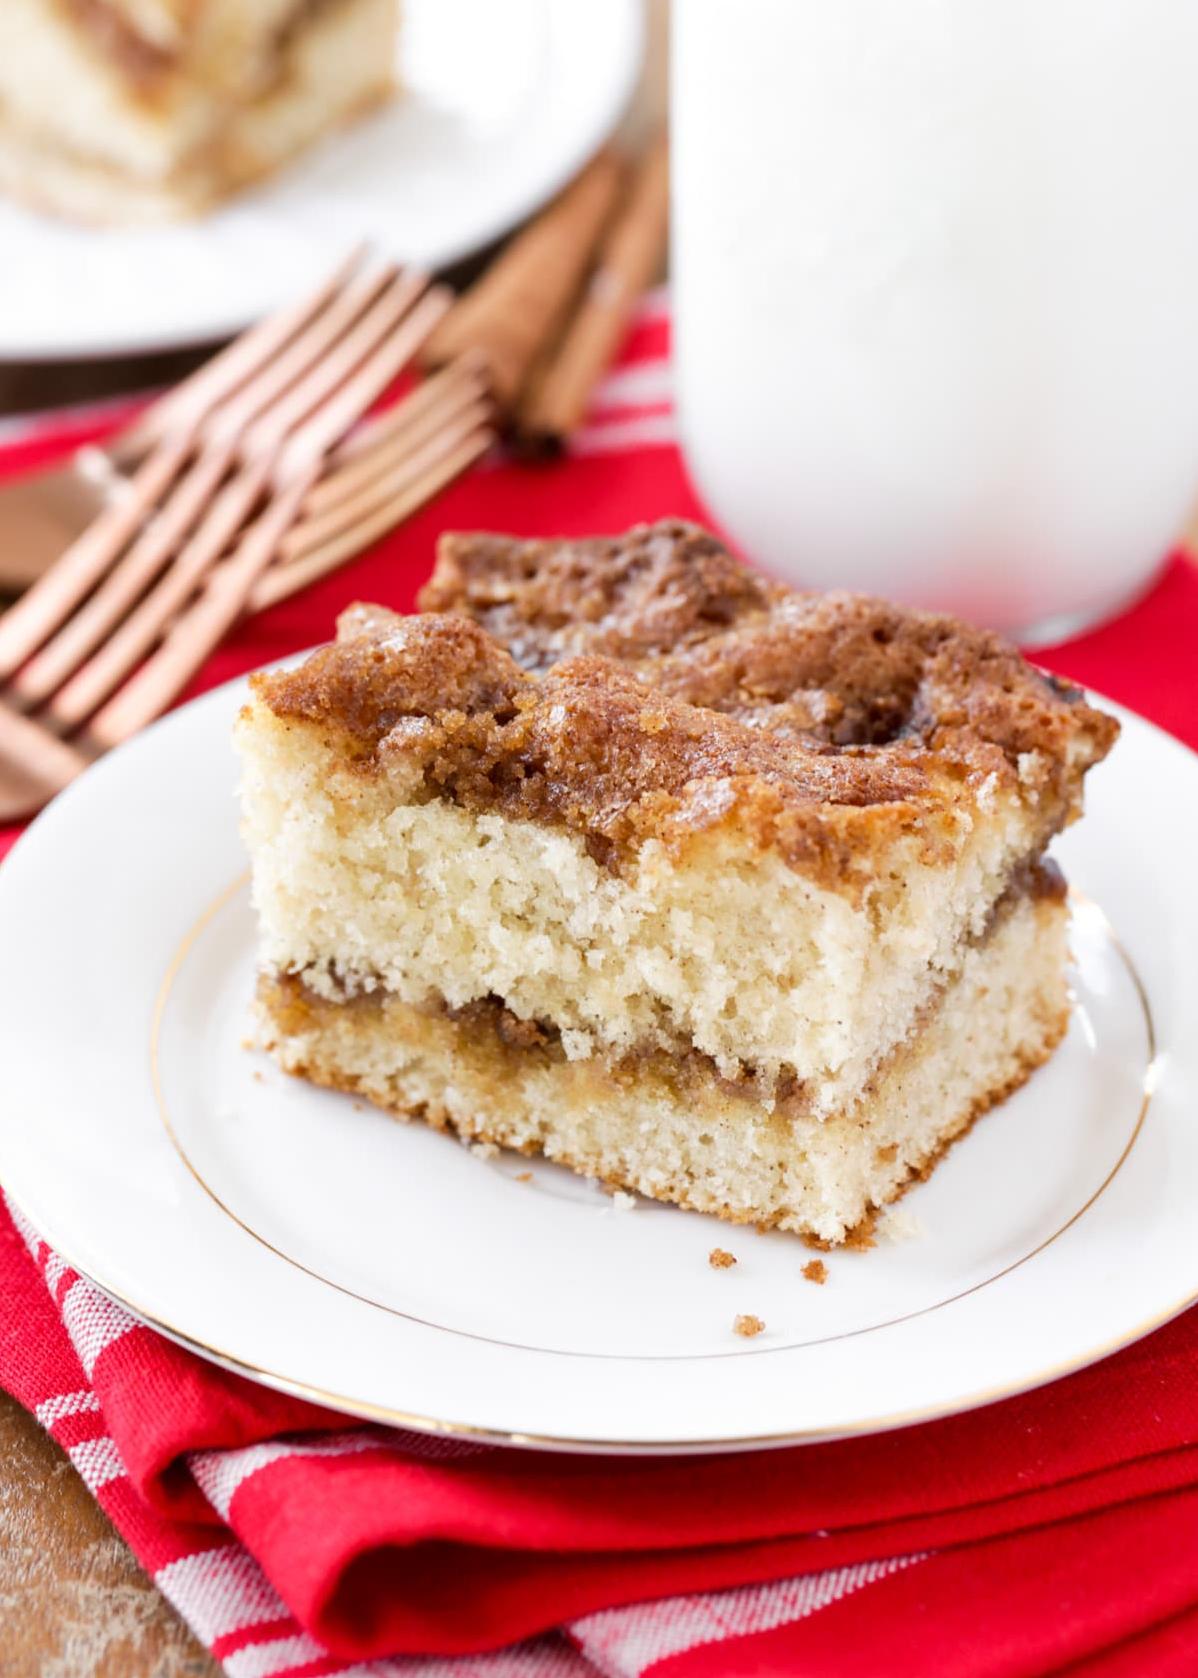  Sink your teeth into our mouth-watering coffee cake